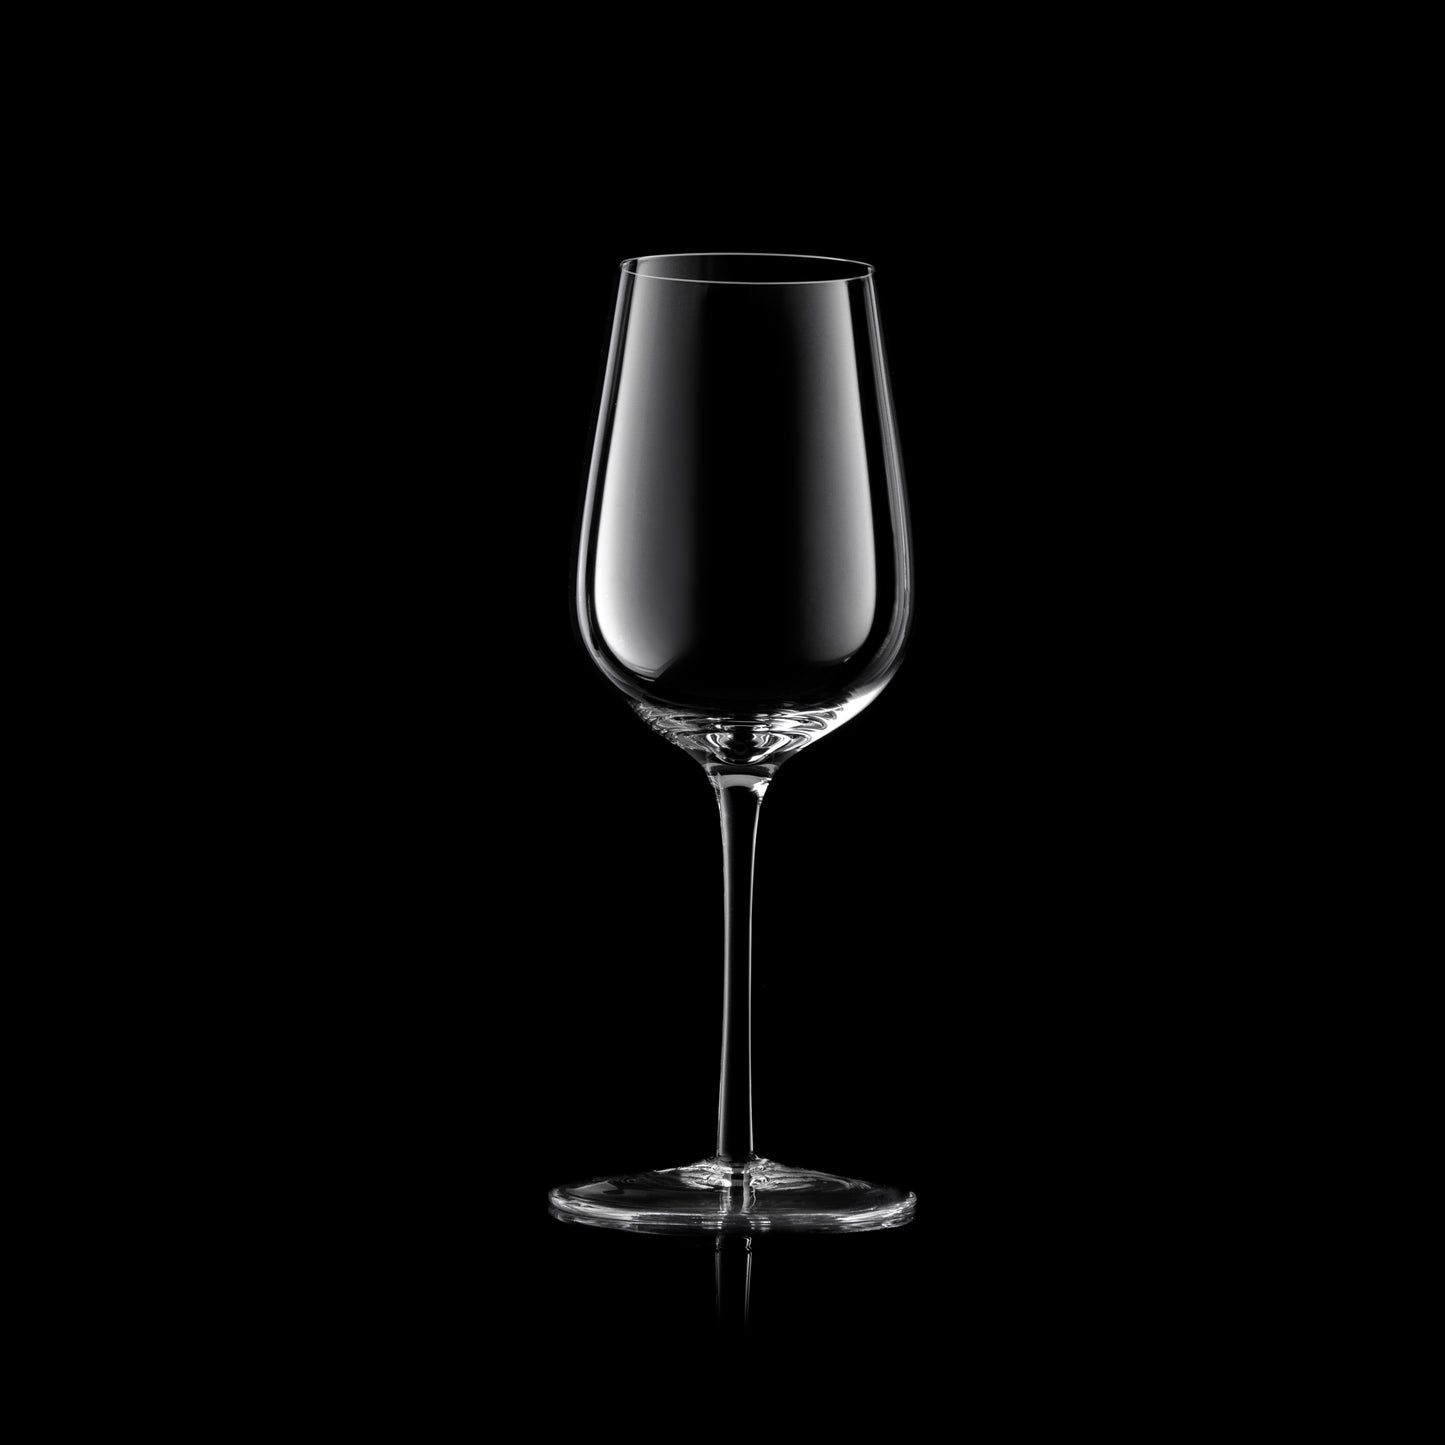 The Tasting Glass